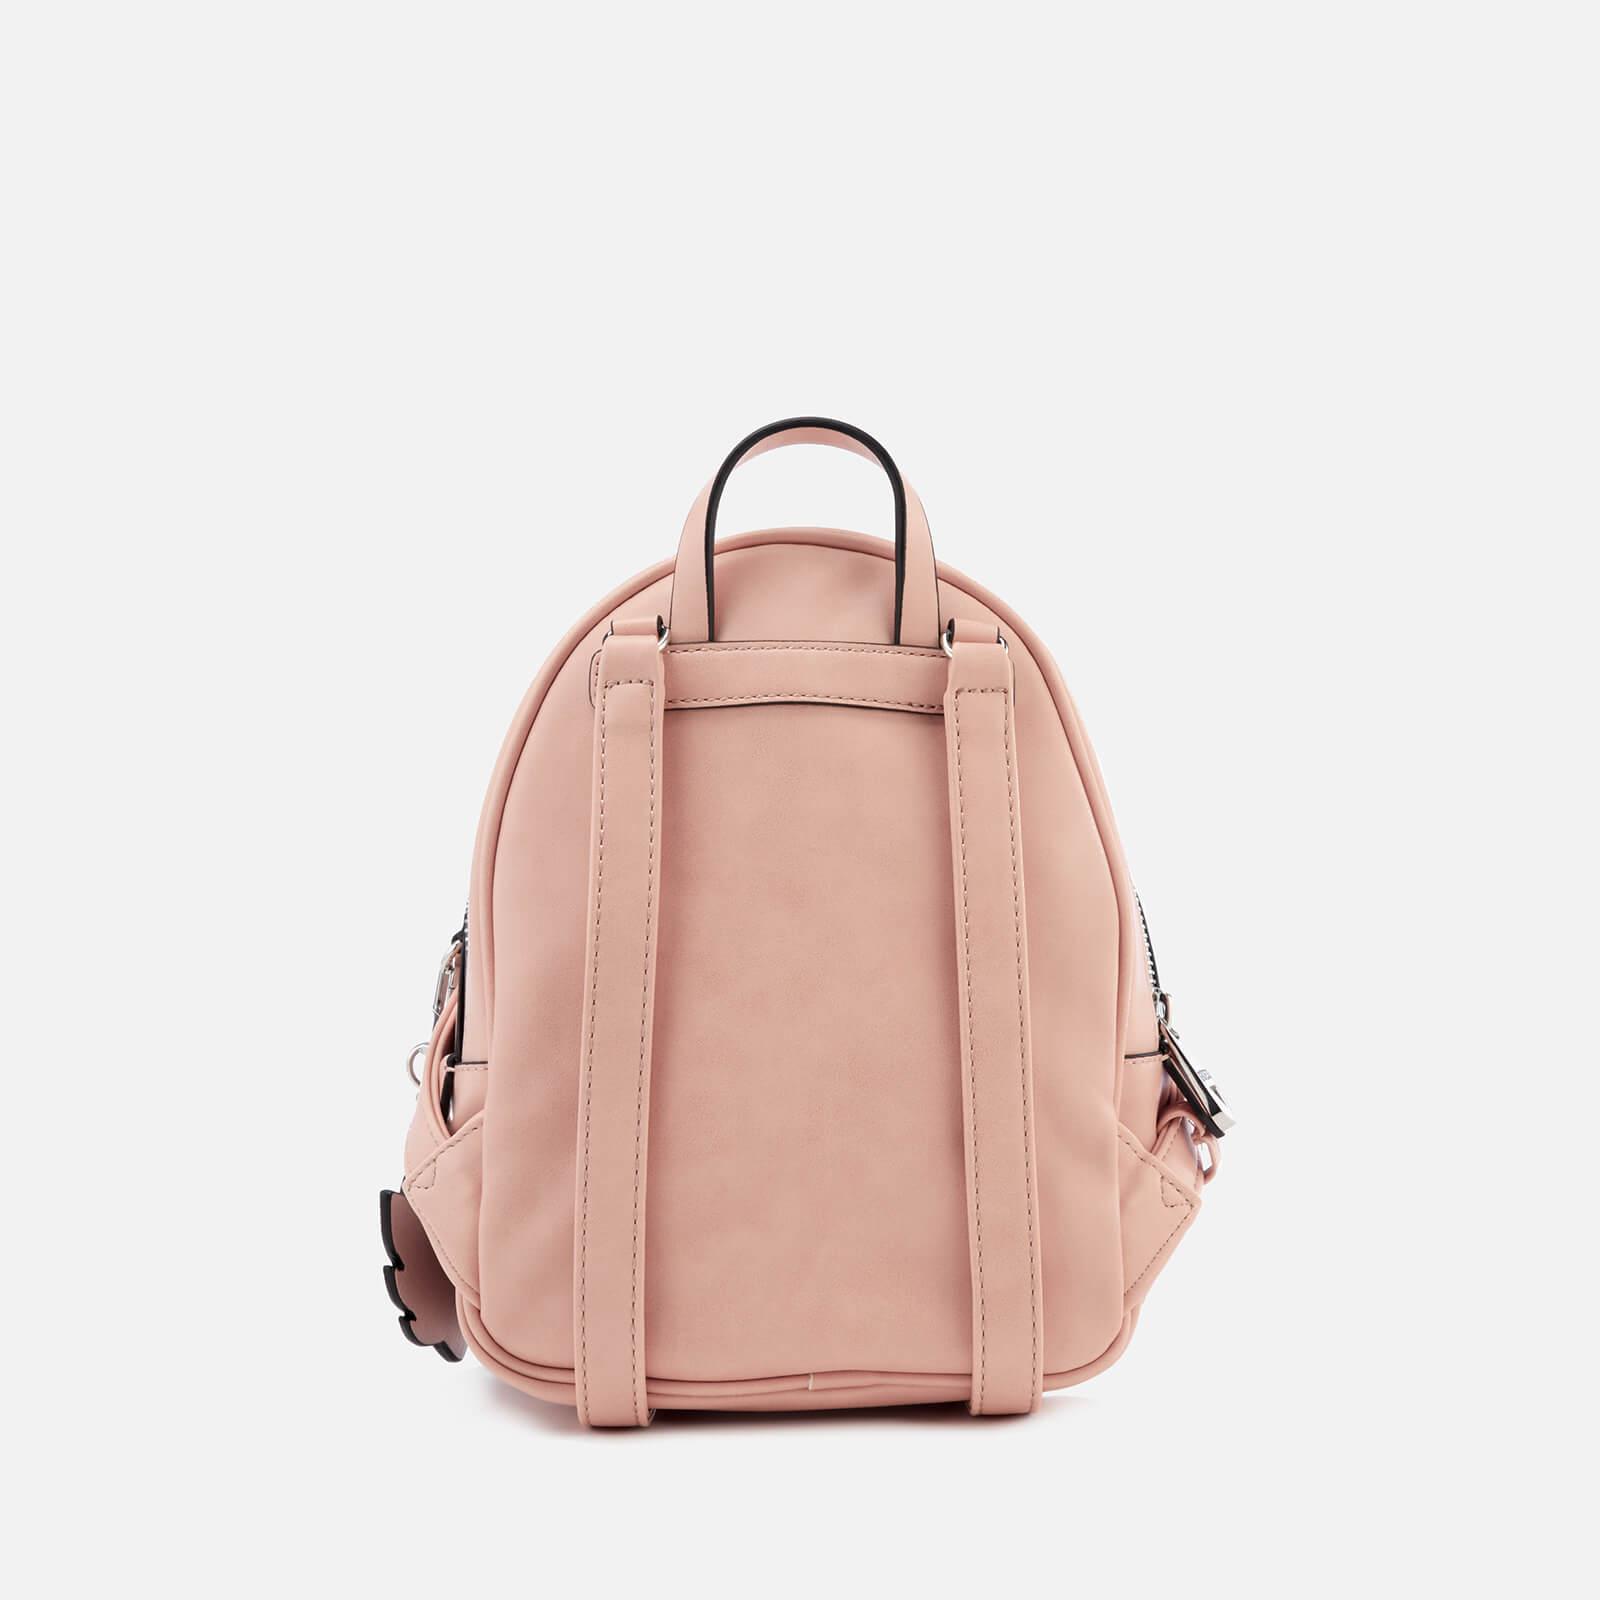 Guess Bradyn Small Backpack in Pink - Lyst